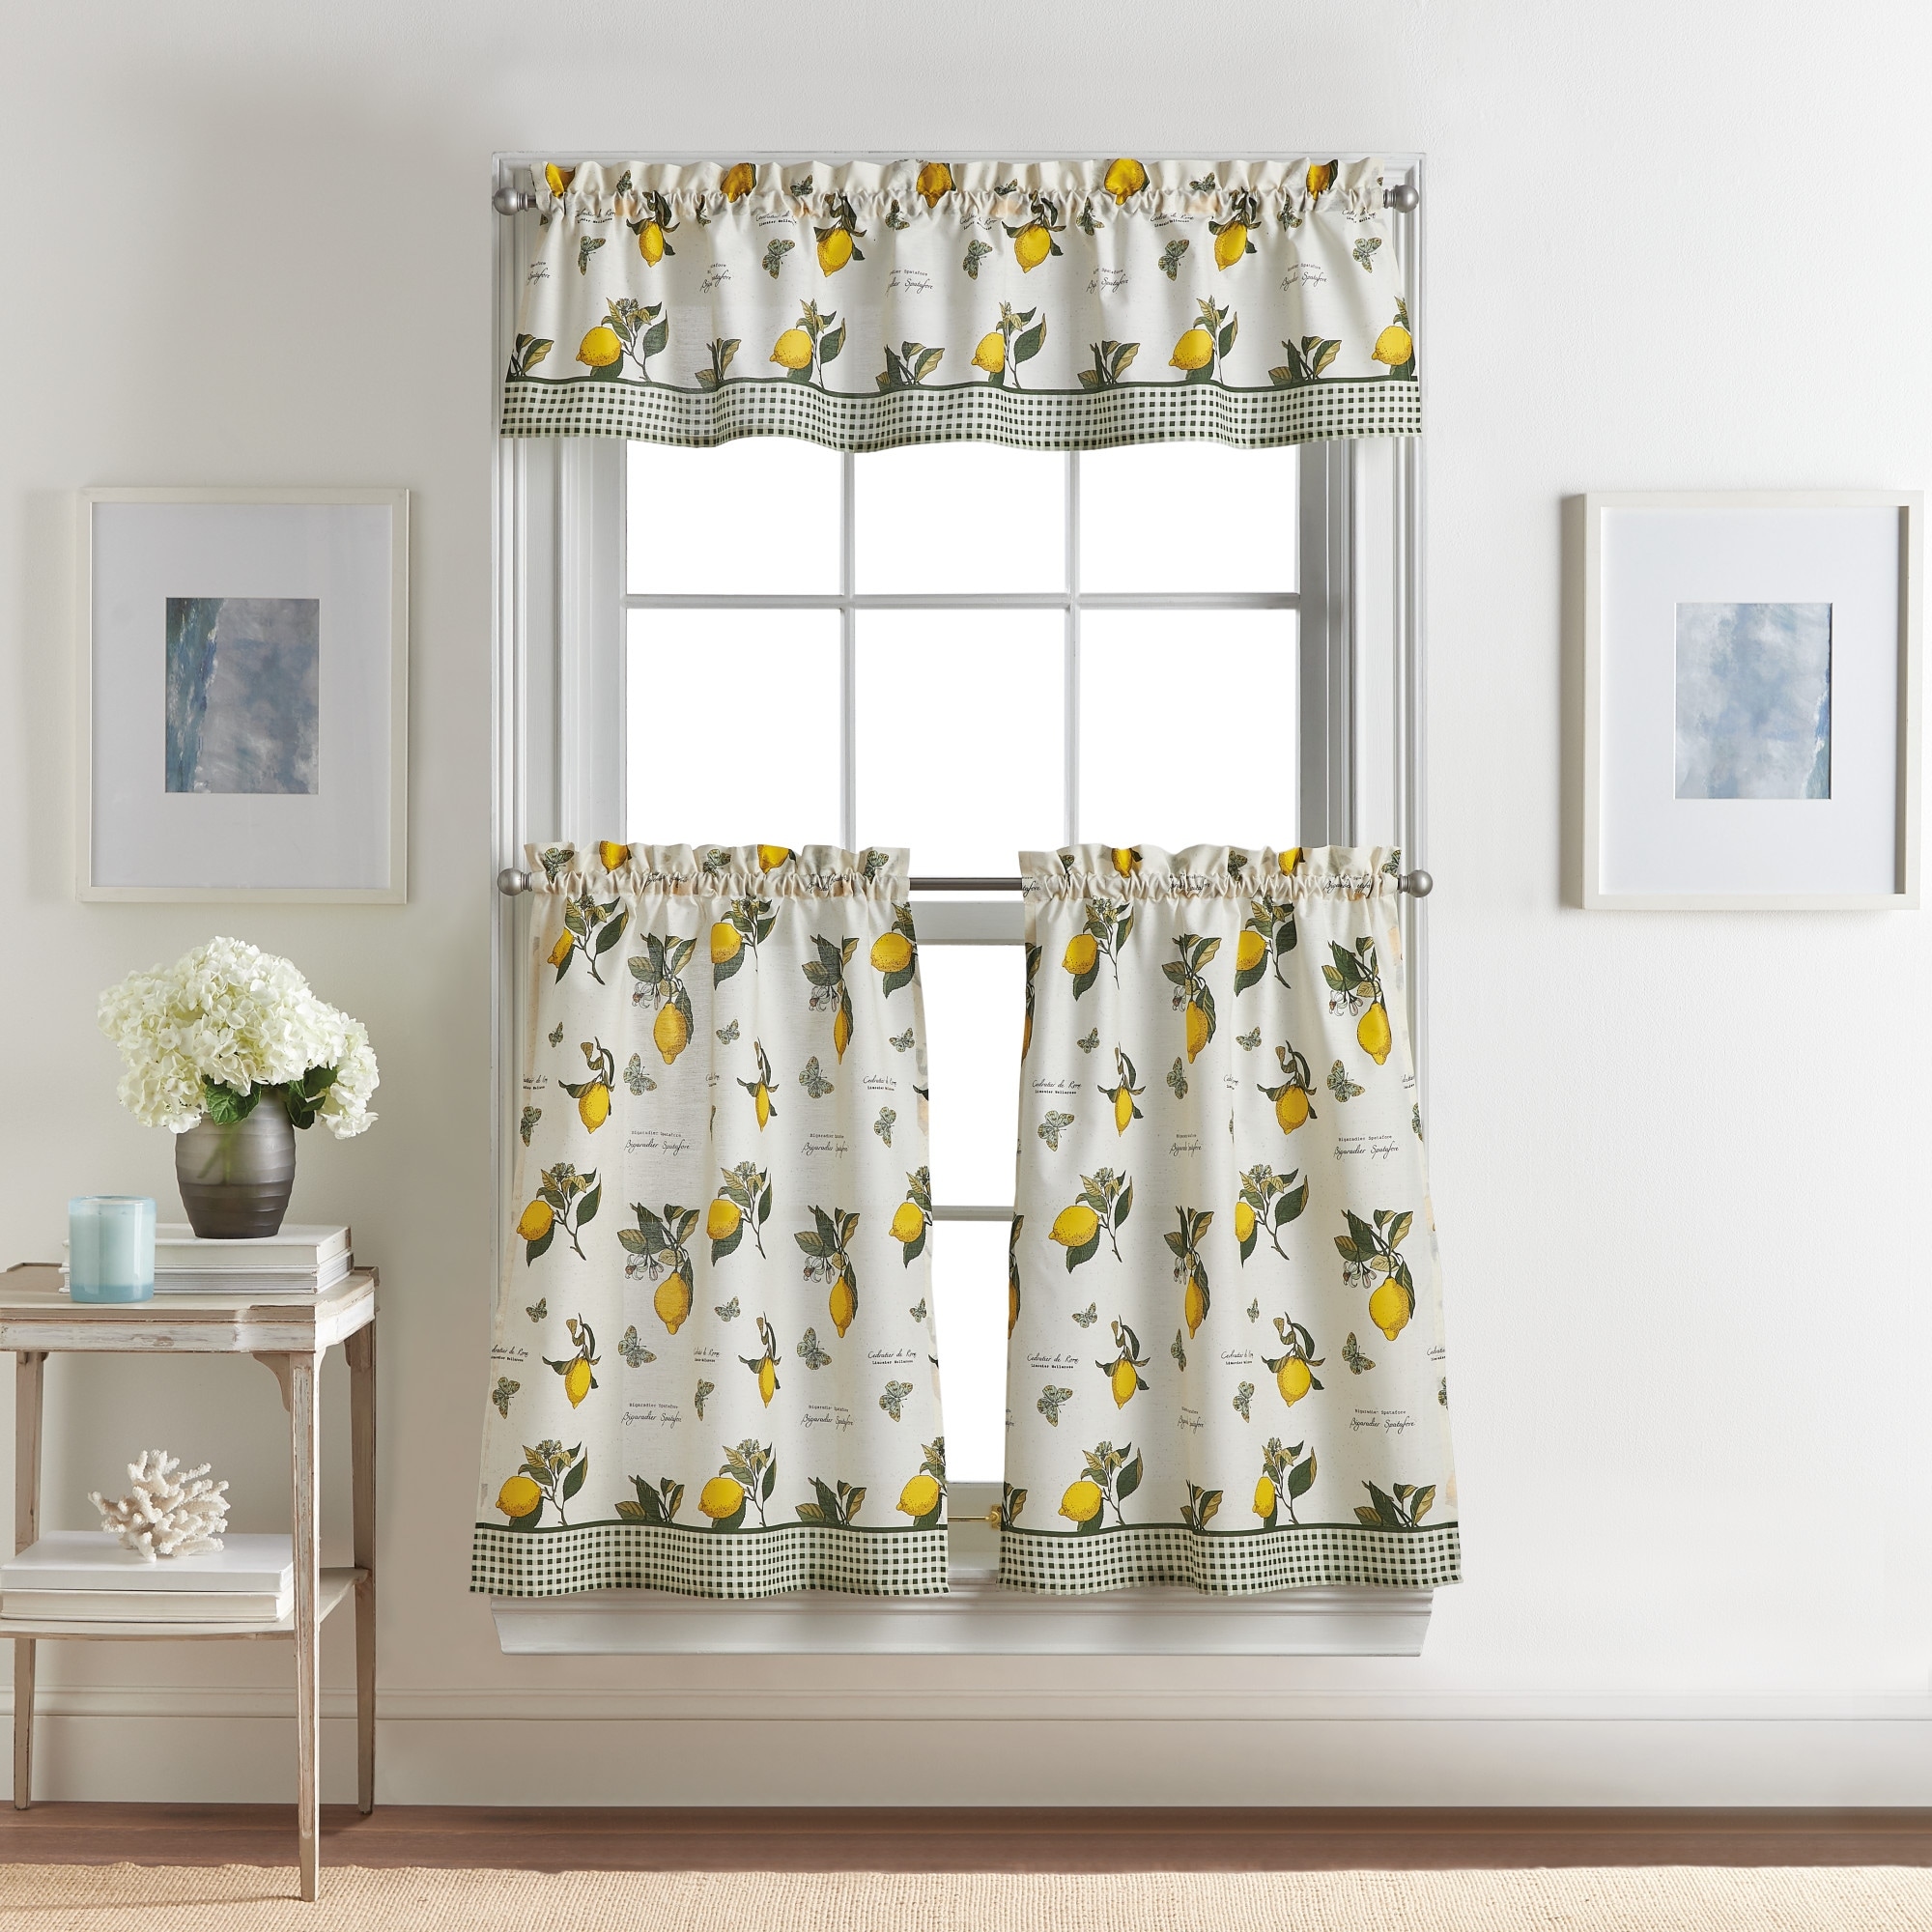 3pc Embroidery Kitchen Curtains Set:2 Tiers & Swag 60"x36"SUNFLOWER IN BASKET,LX 